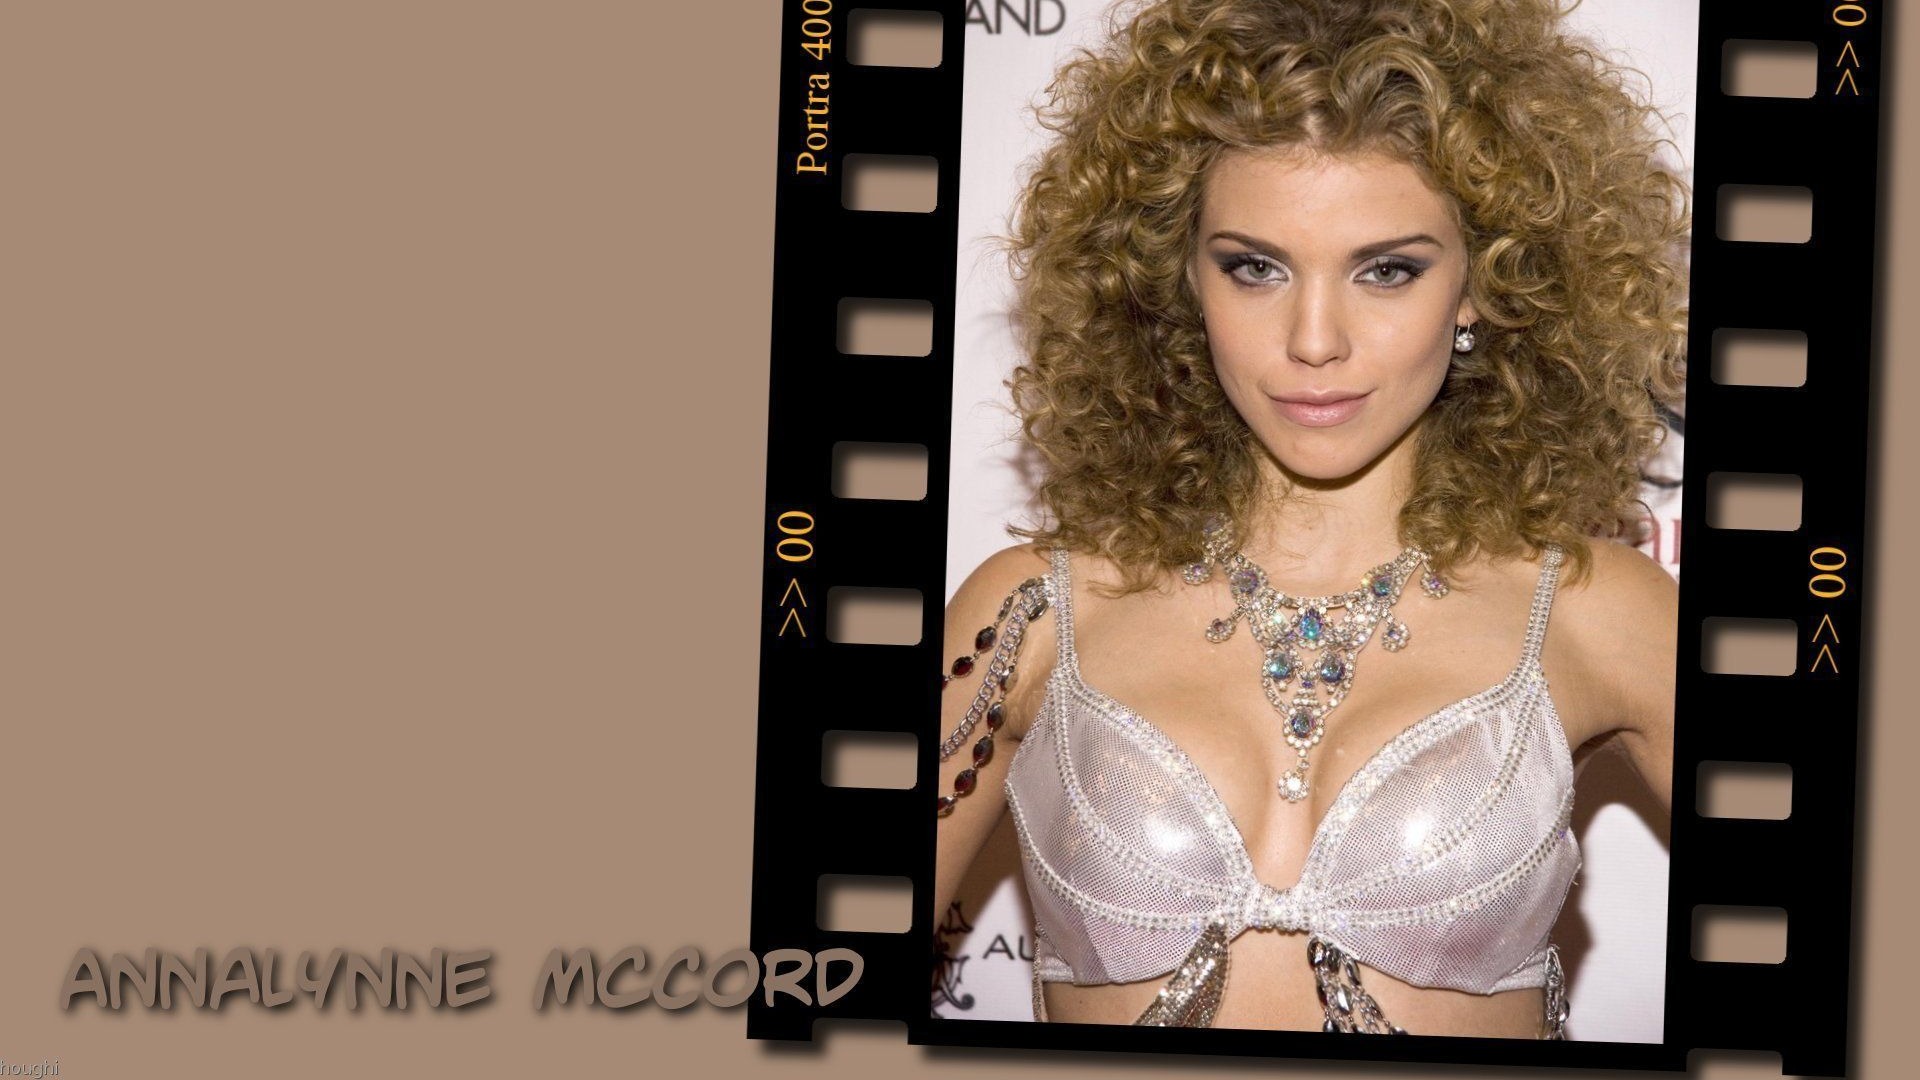 AnnaLynne McCord #013 - 1920x1080 Wallpapers Pictures Photos Images